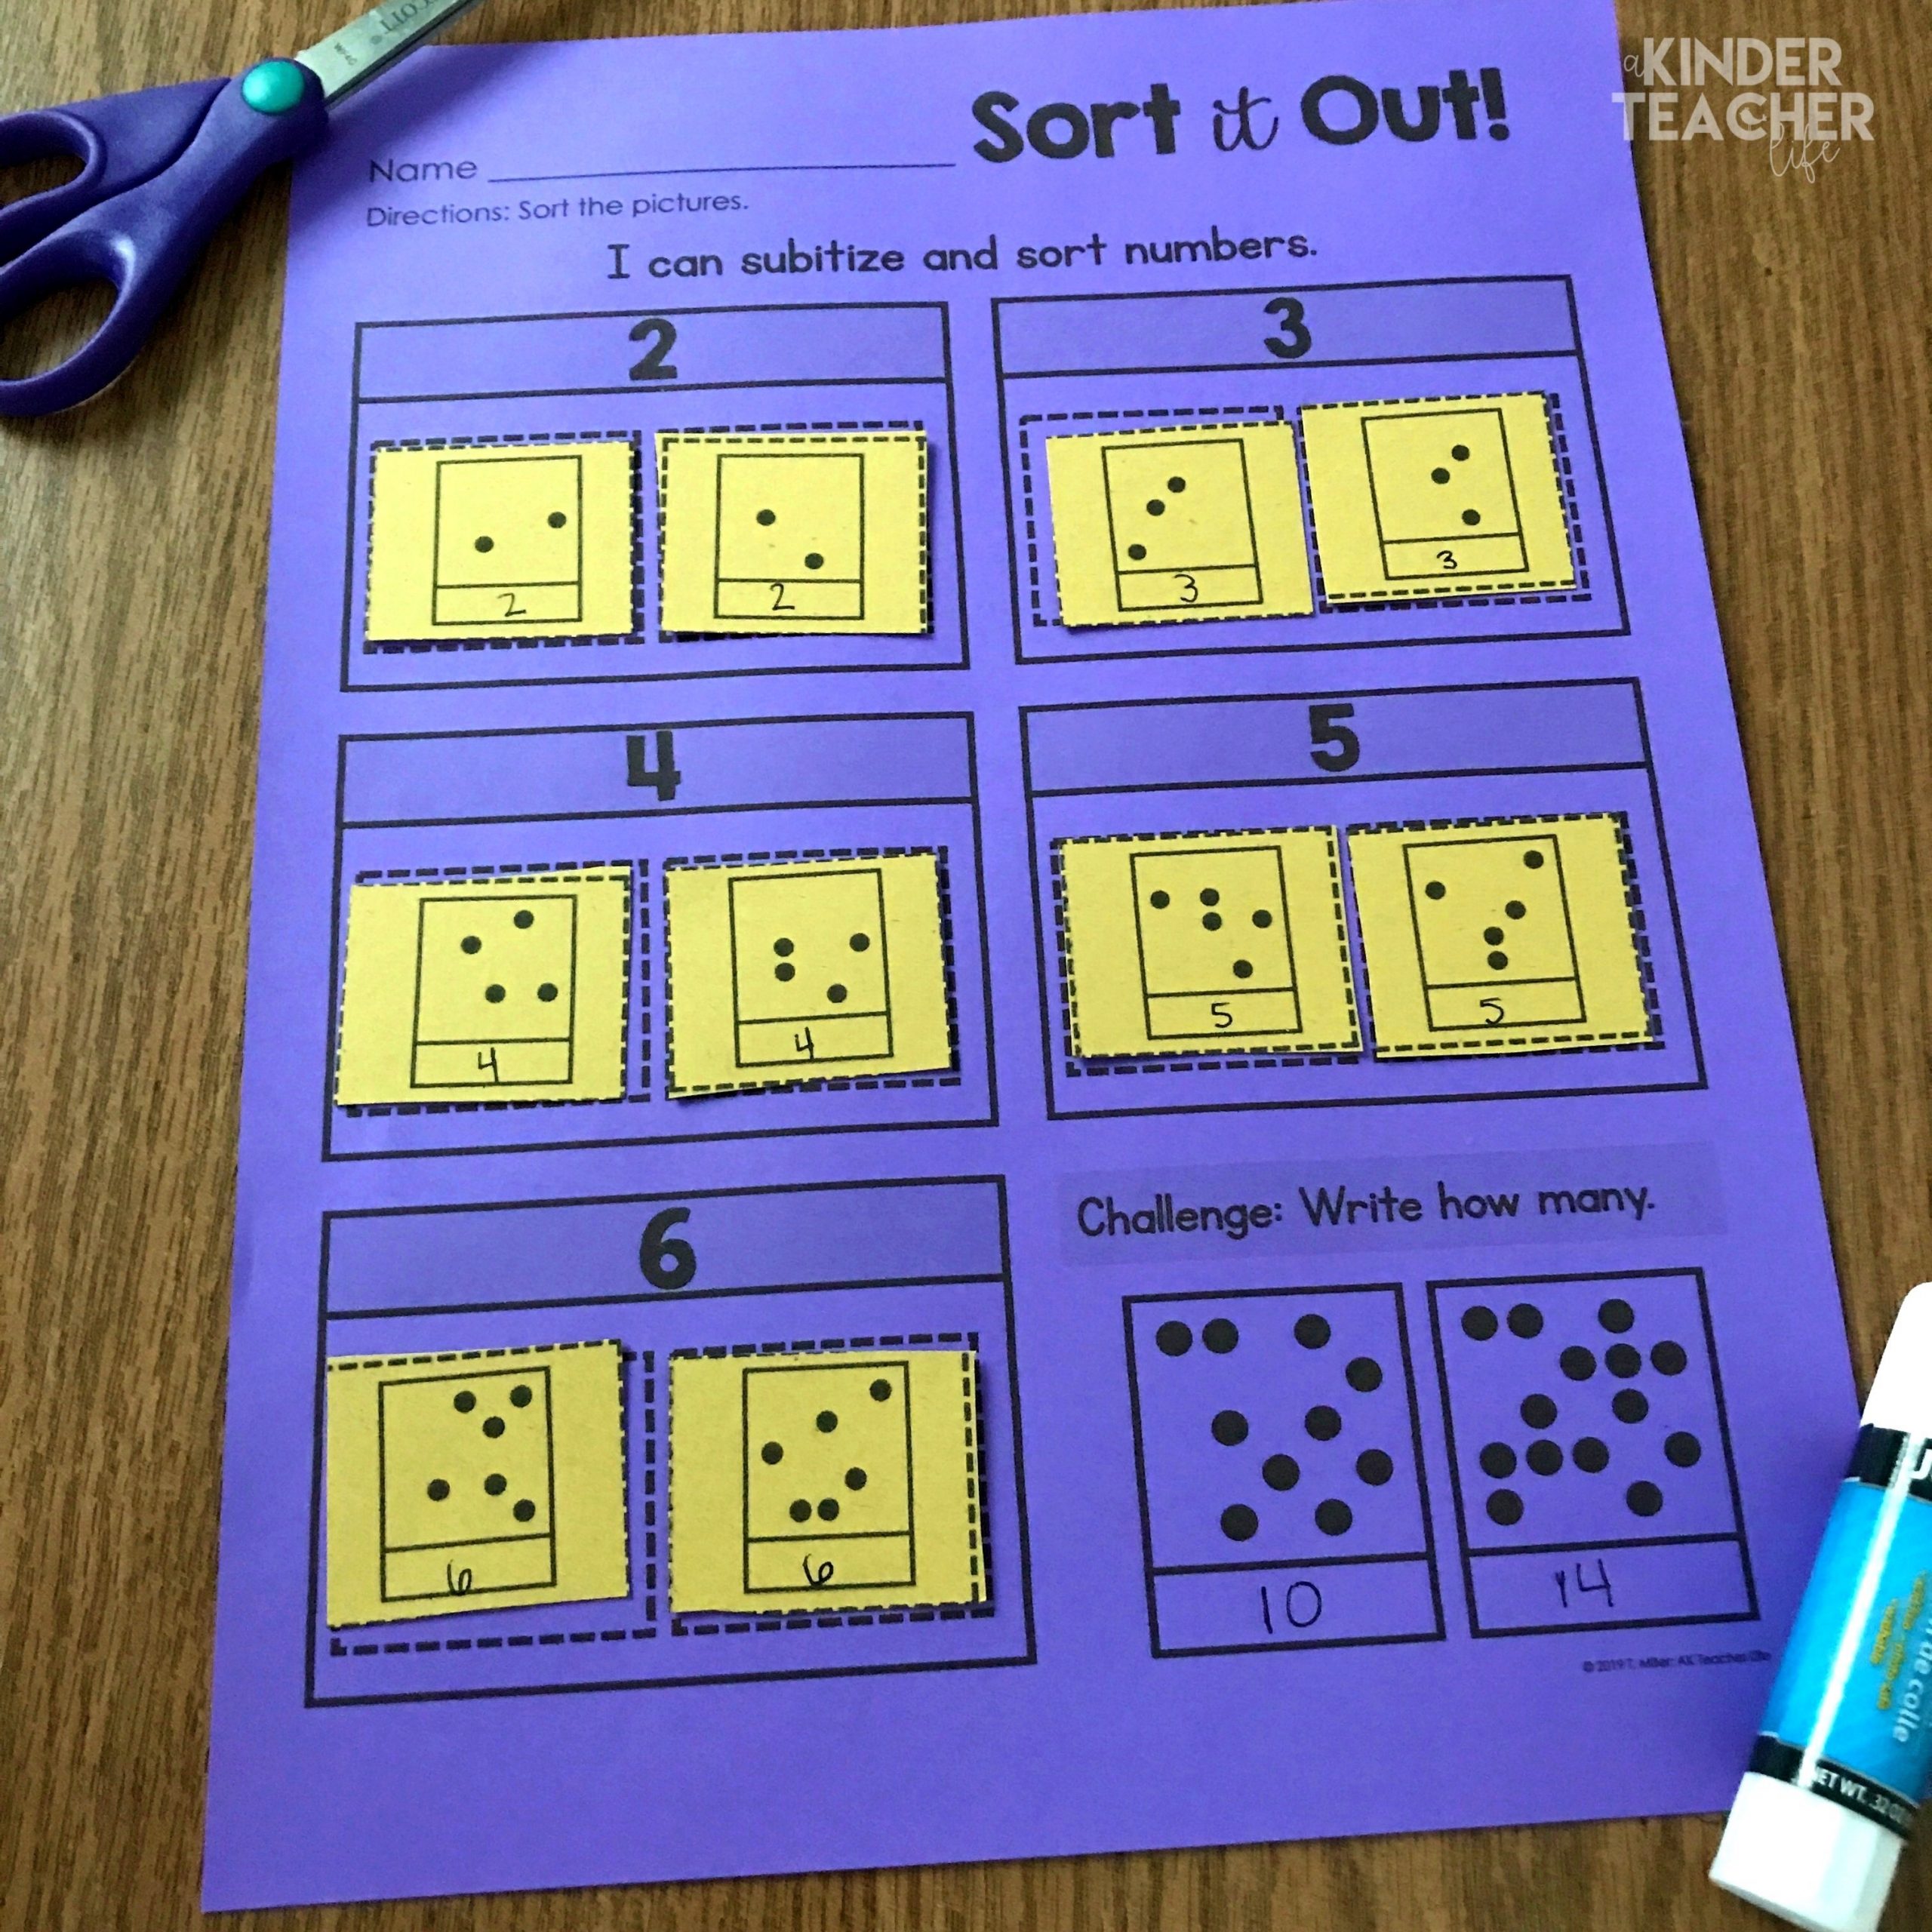 Subitizing sorting worksheet - Subitize dot patterns up to ten. This is perfect for small group or independent work. 